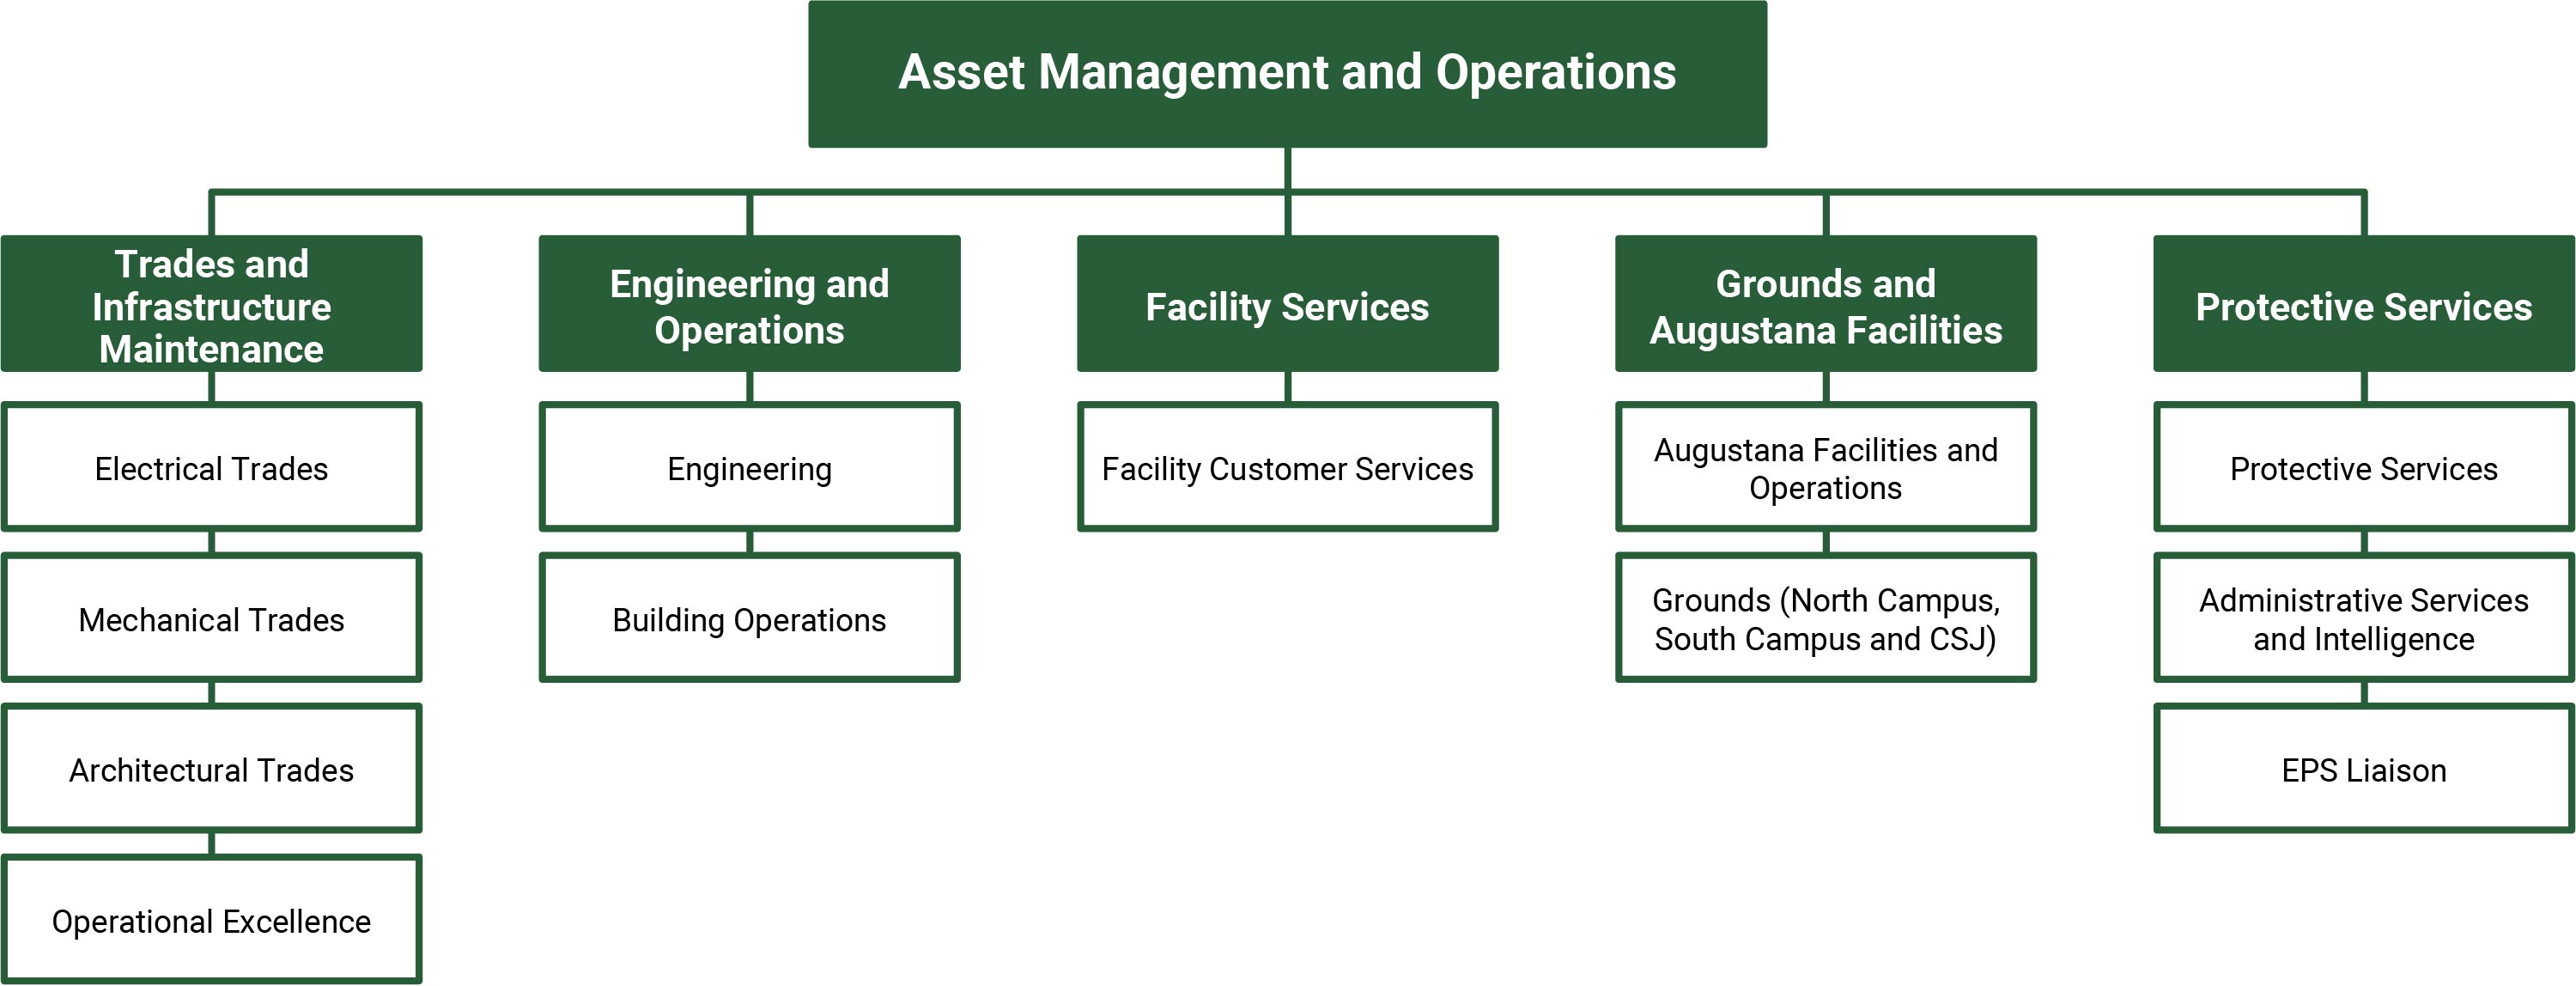 Organizational chart representing the Asset Management and Operations unit within the Vice-President Facilities & Operations portfolio